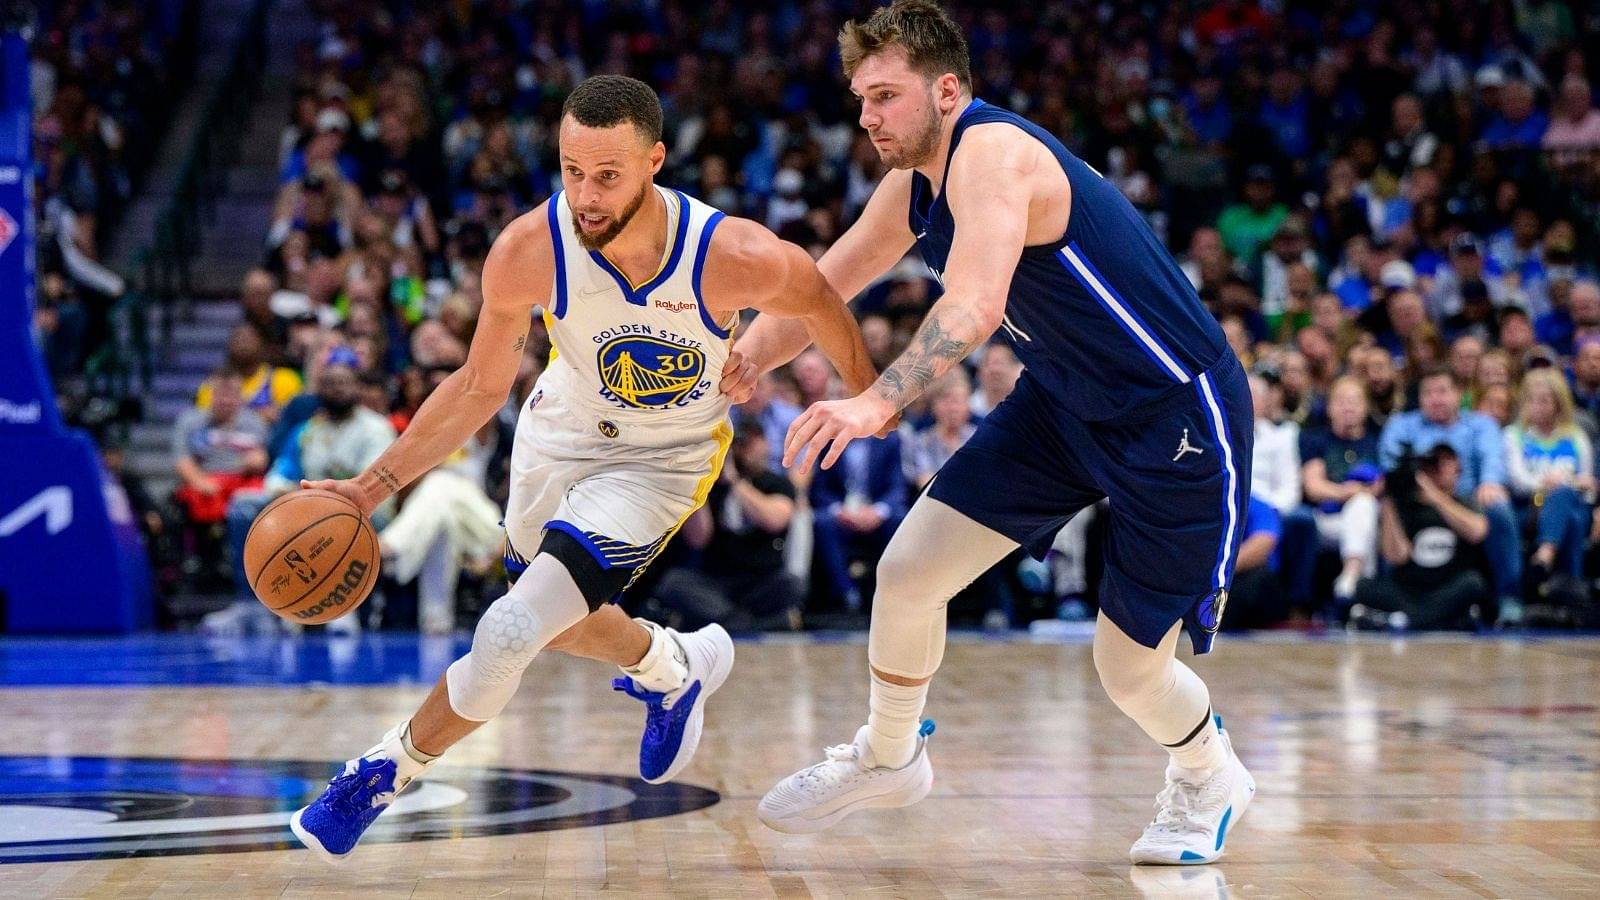 “Steph Curry heard all the Luka Doncic praise and he took it PERSONAL”: Kendrick Perkins backpedals on his favorites in Warriors – Mavs series and gets torched by Dub Nation